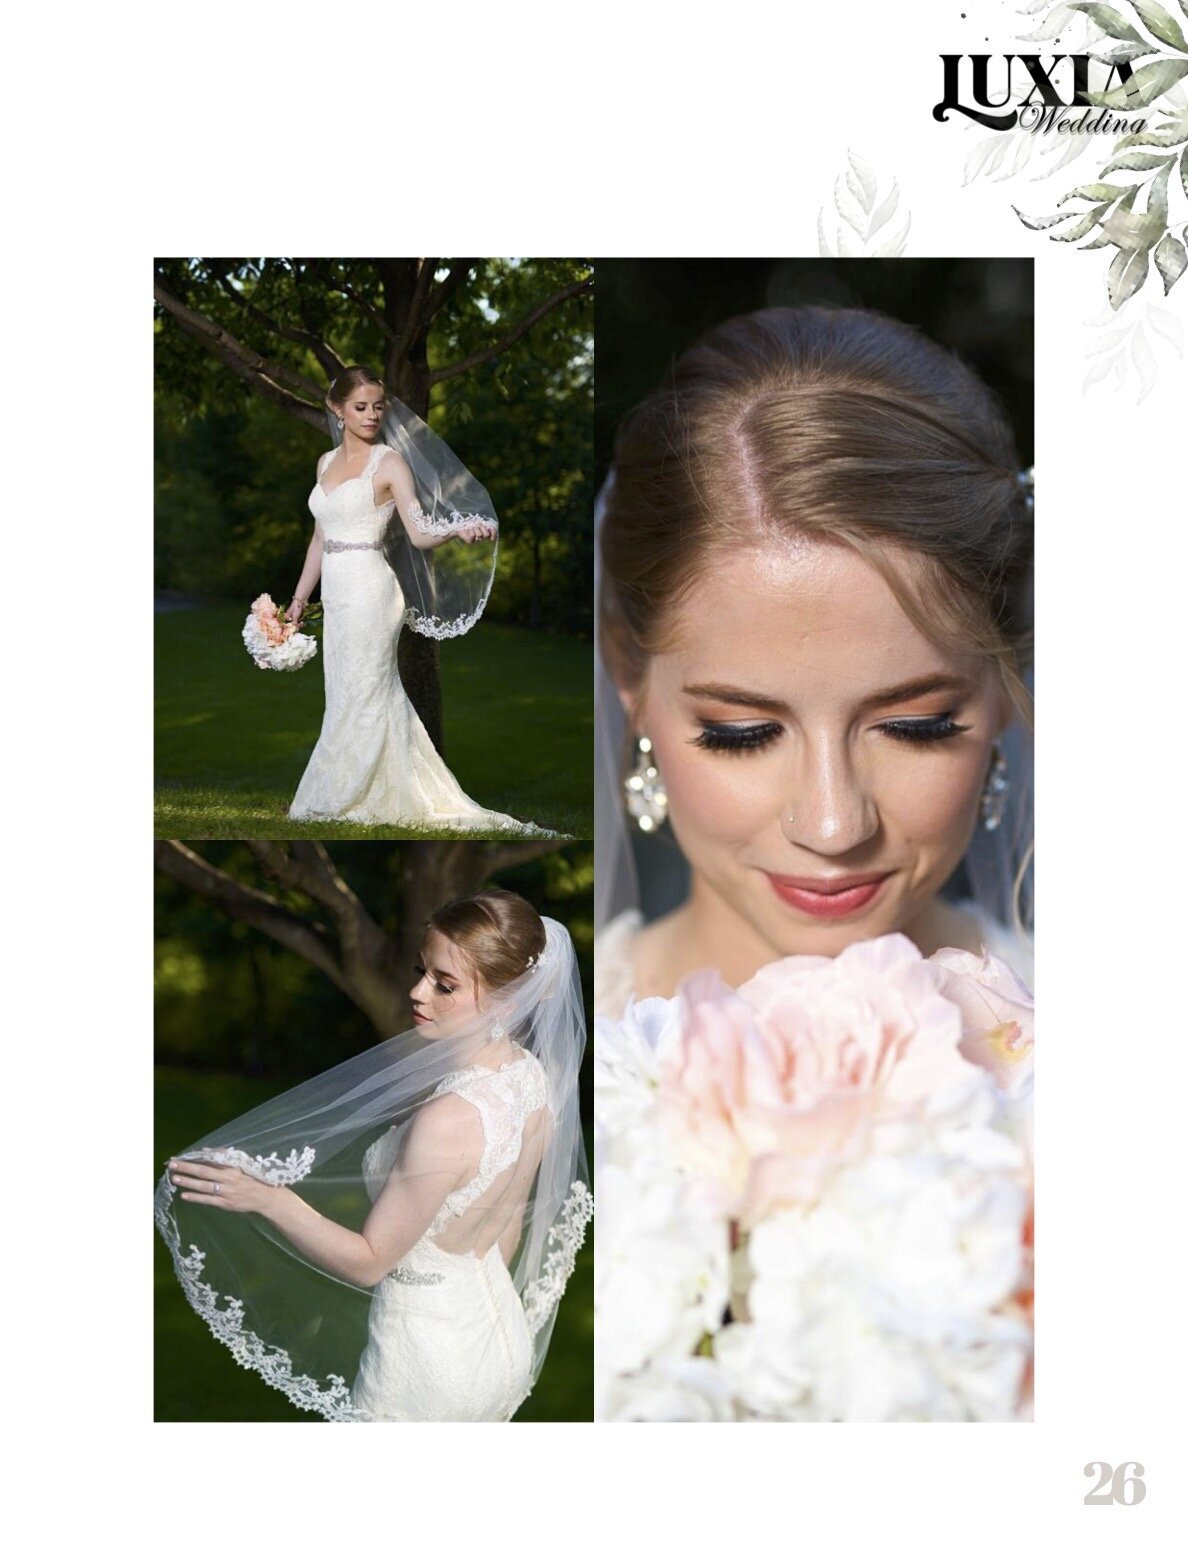 7Luxia_Wedding_Luxia_Wedding_Issue_2